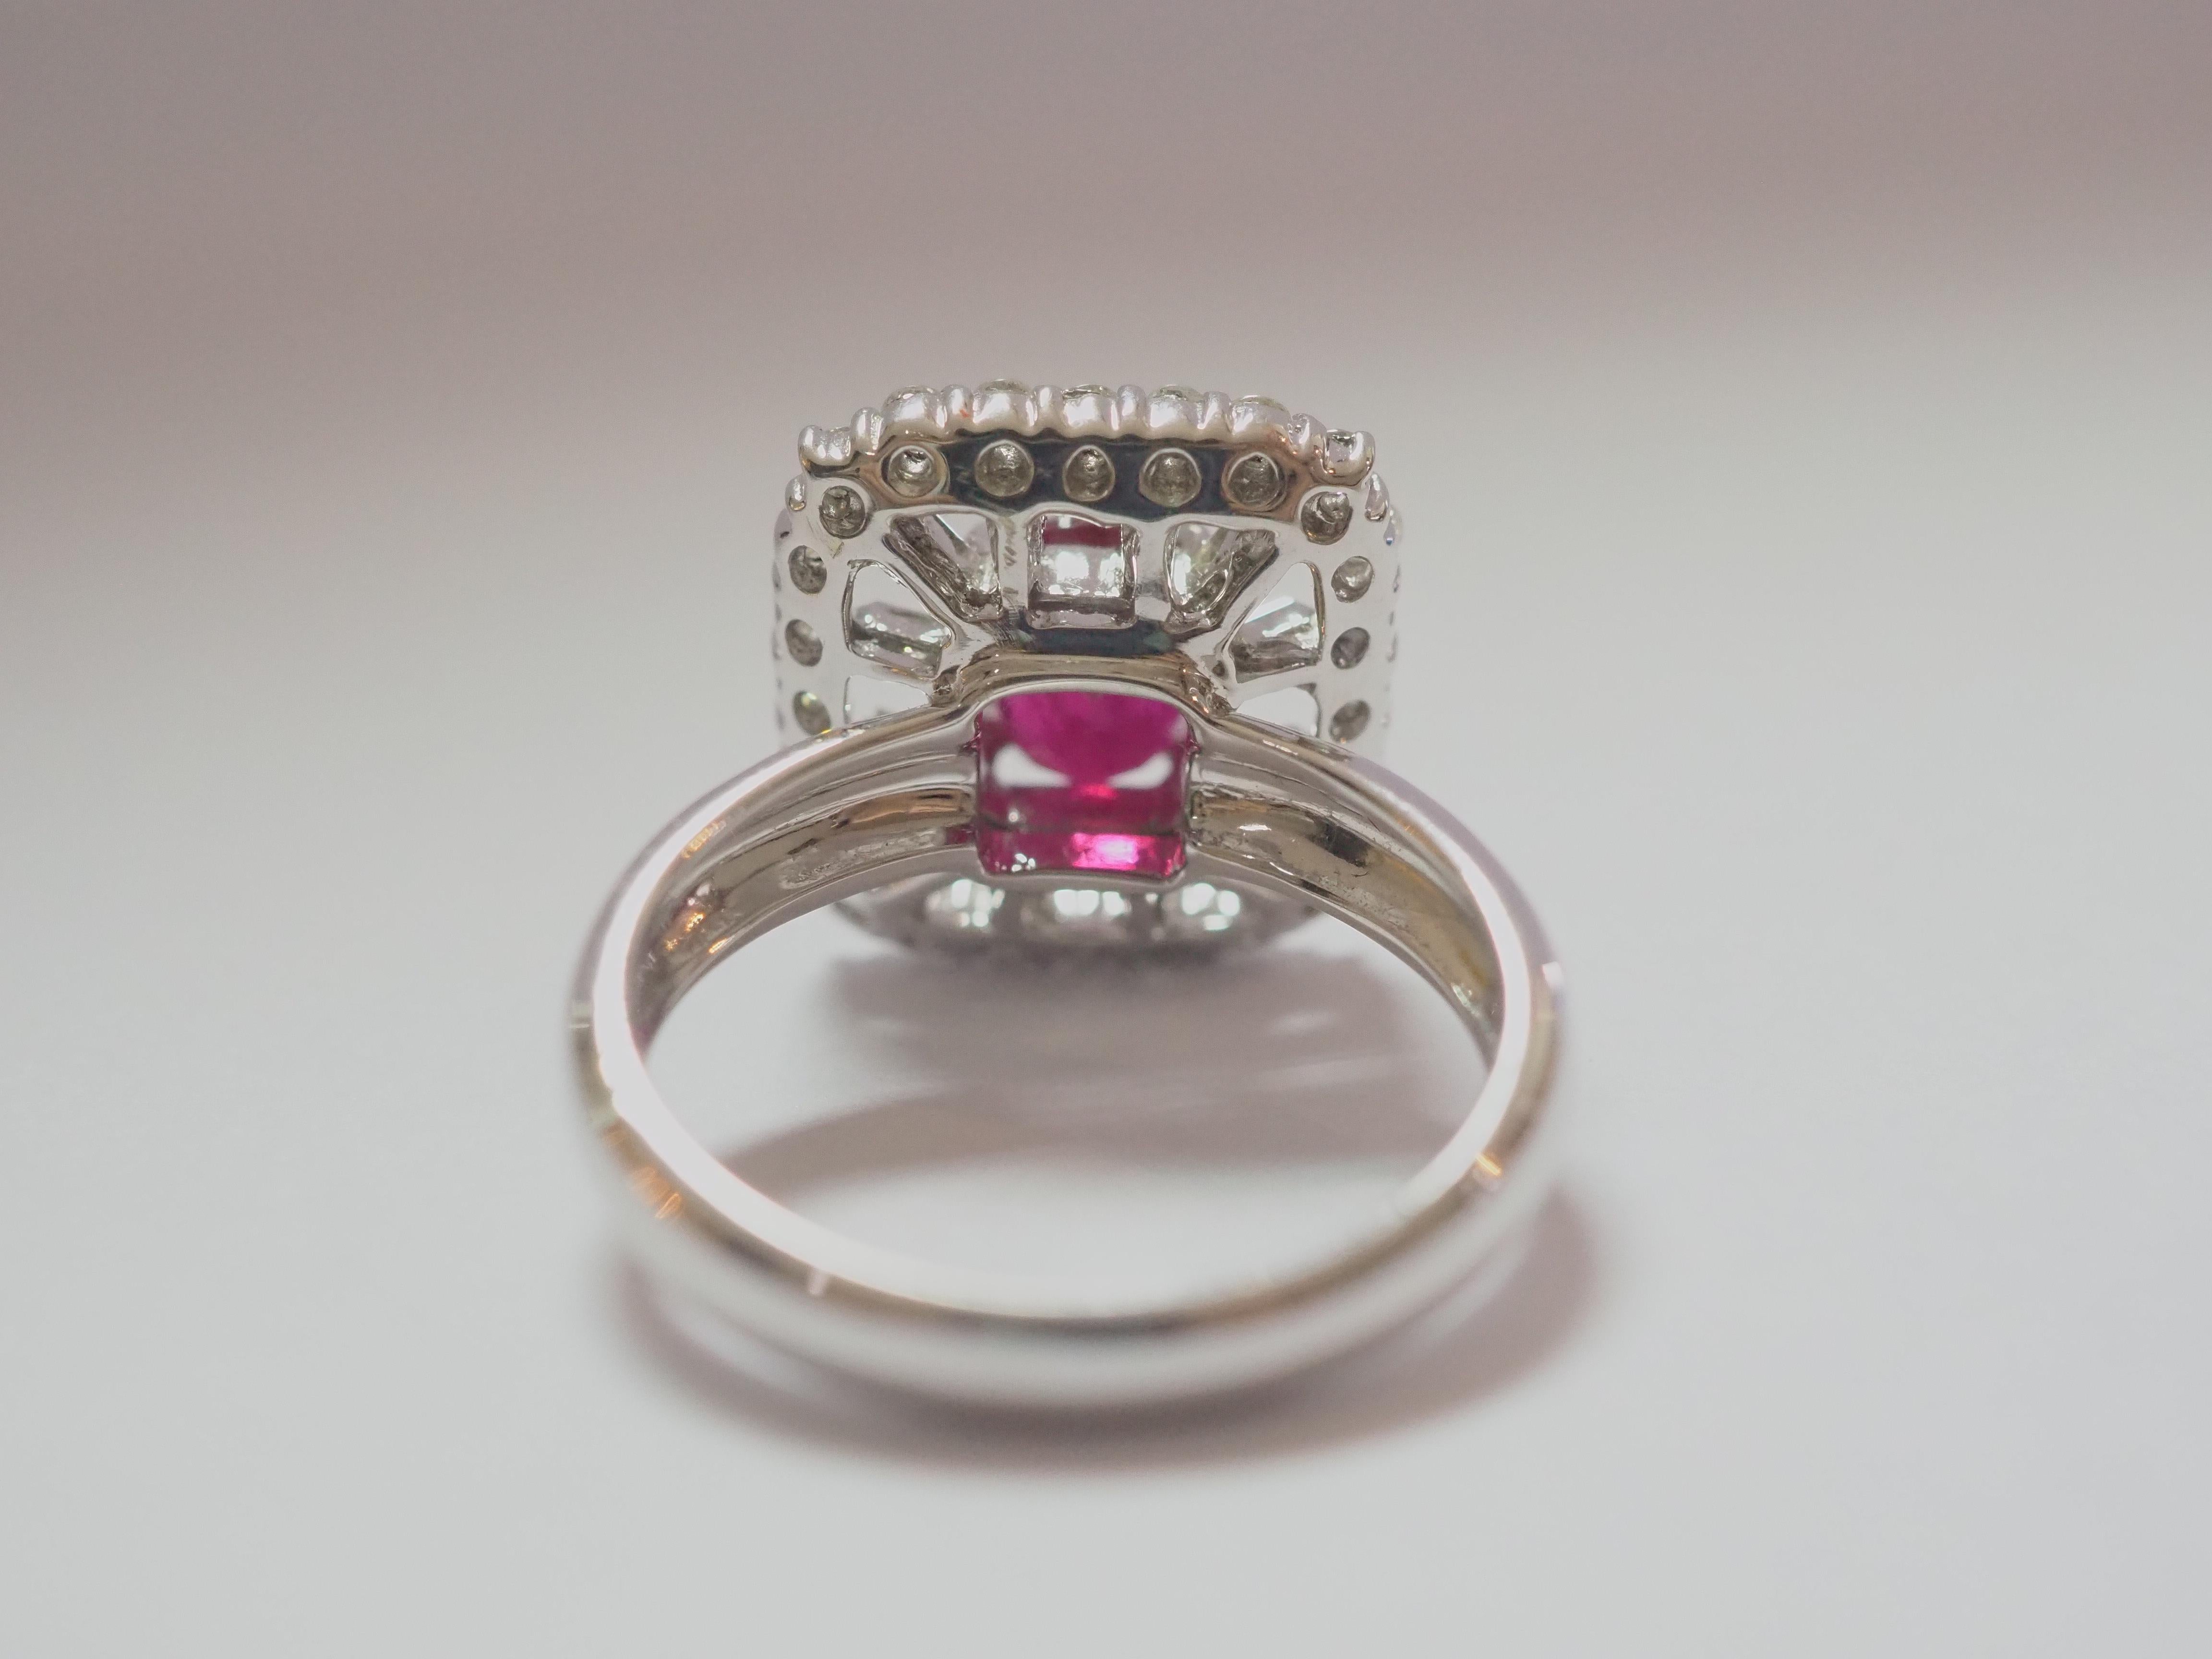 Women's AIGS 18k White Gold 1.28ct Oval Thai Ruby & 0.7ct Diamond Cocktail Ring